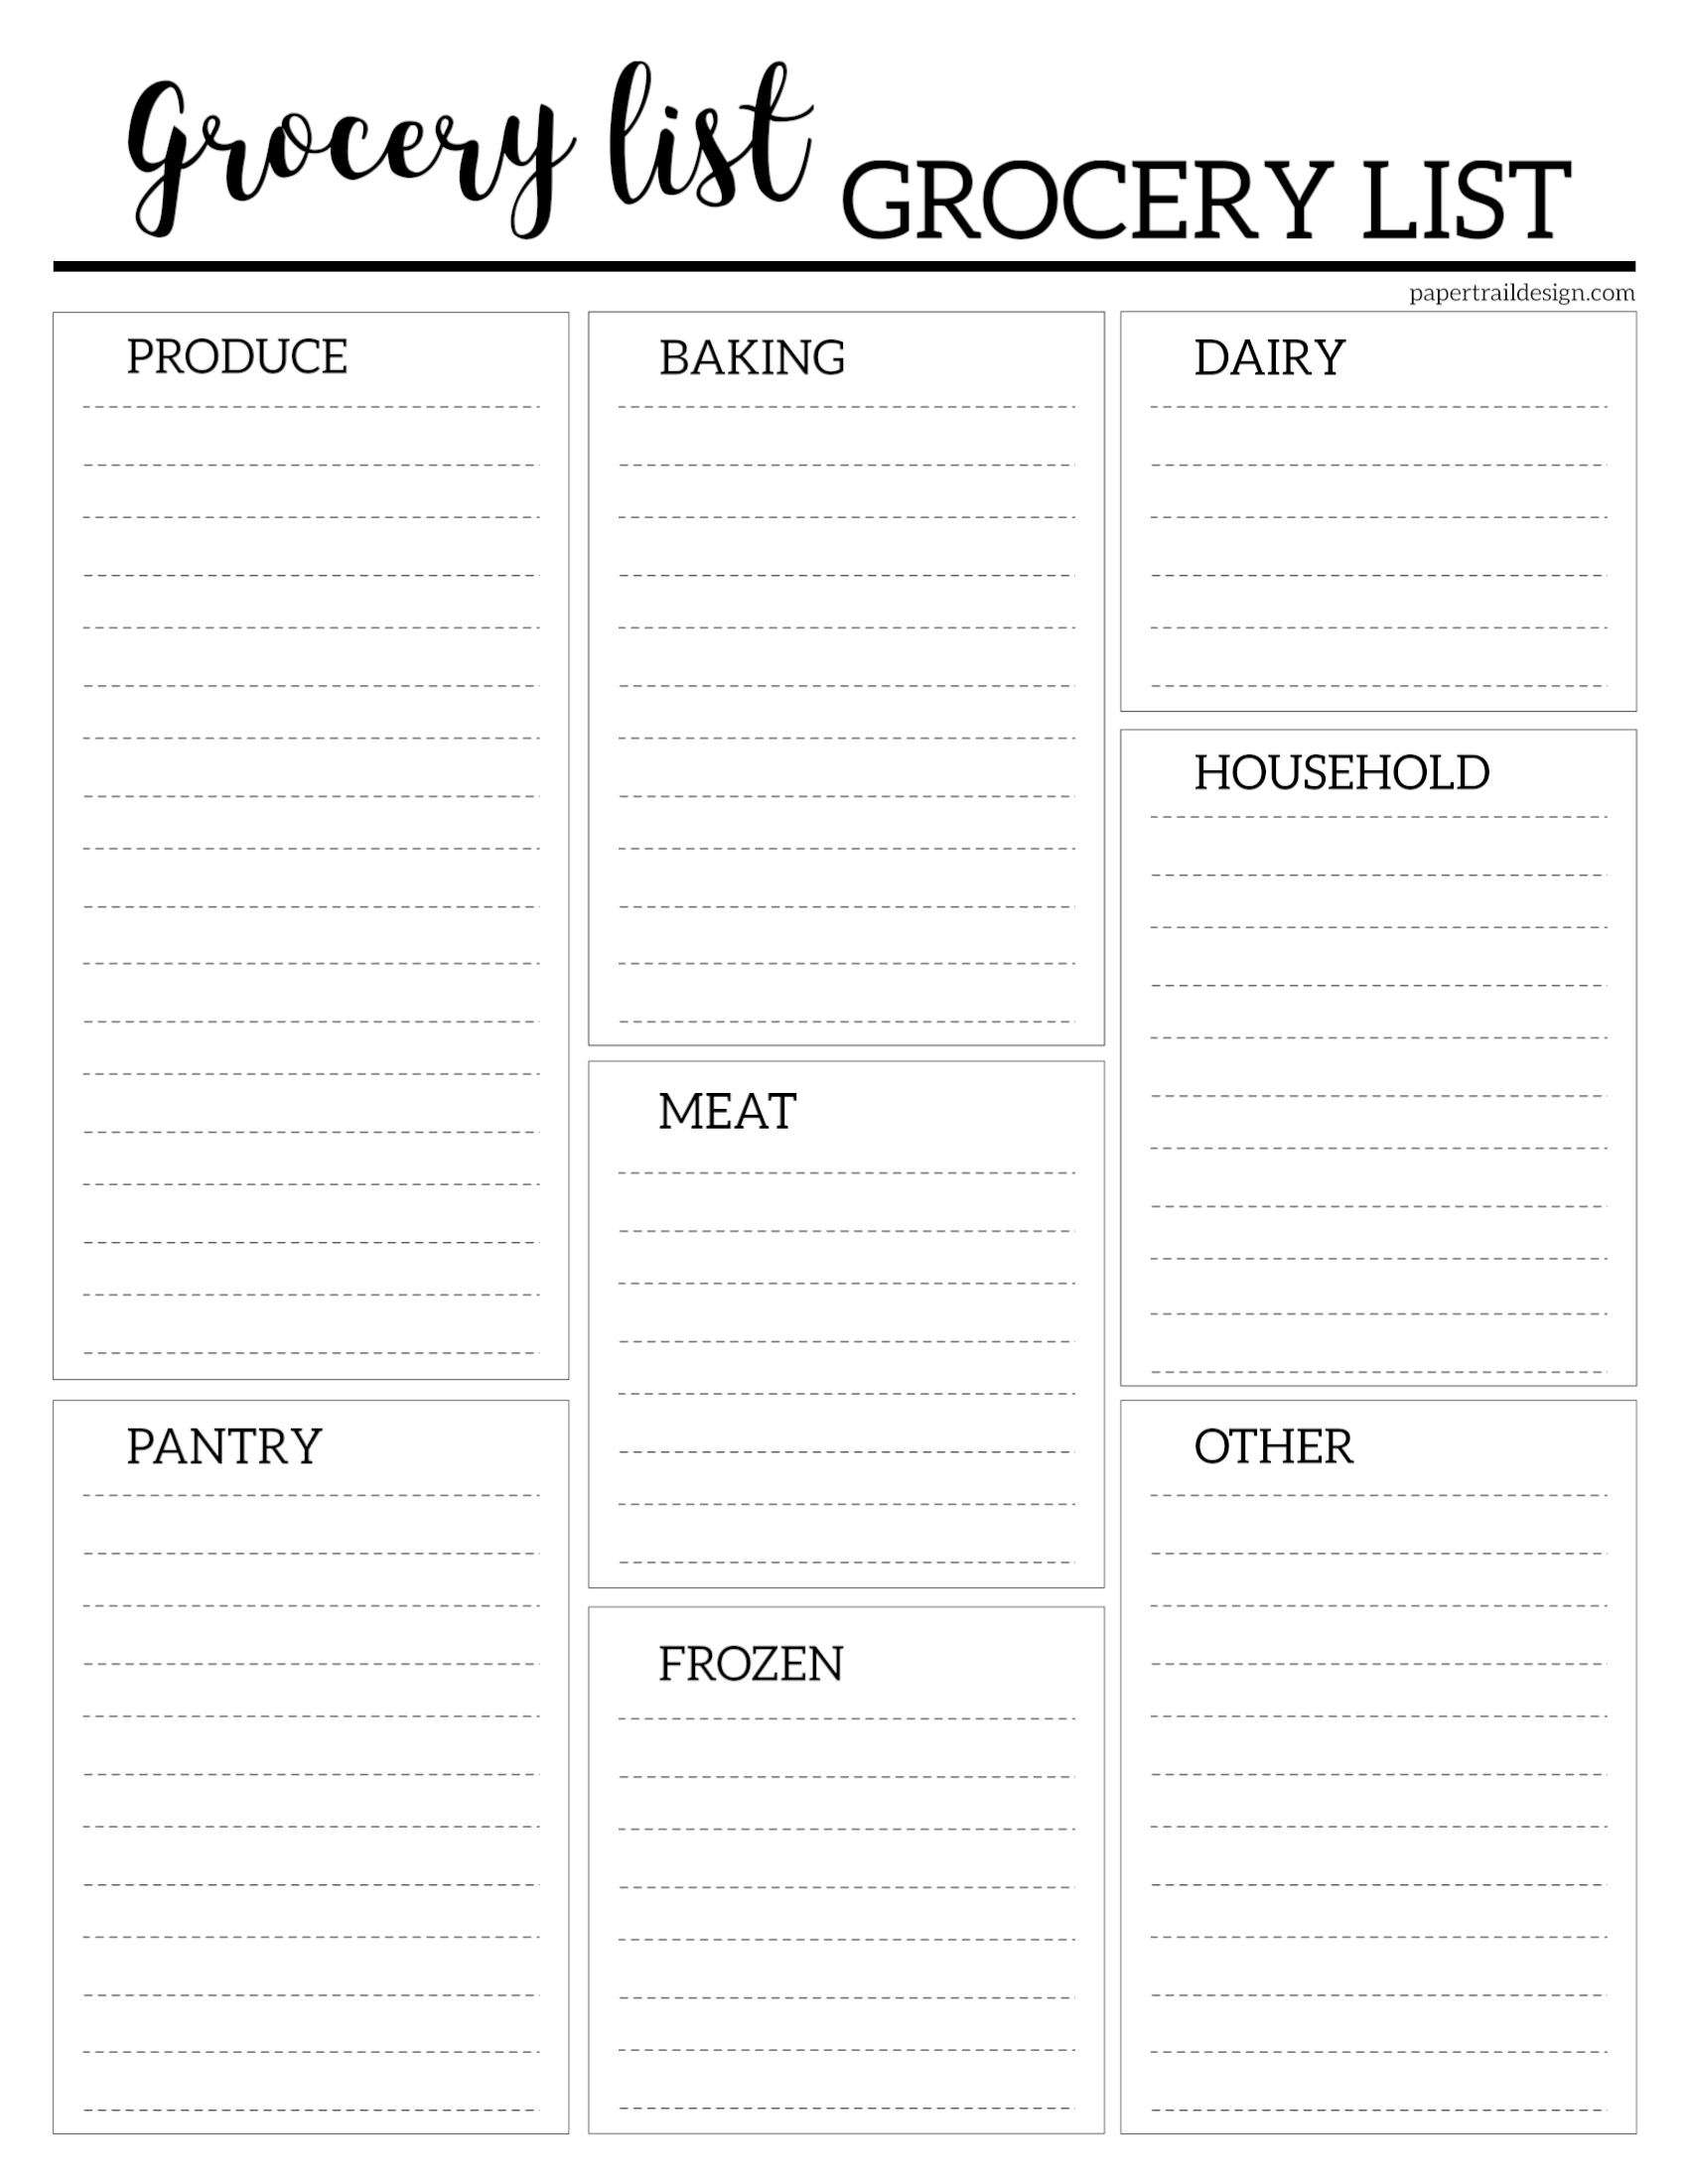 free-grocery-list-printable-paper-trail-design